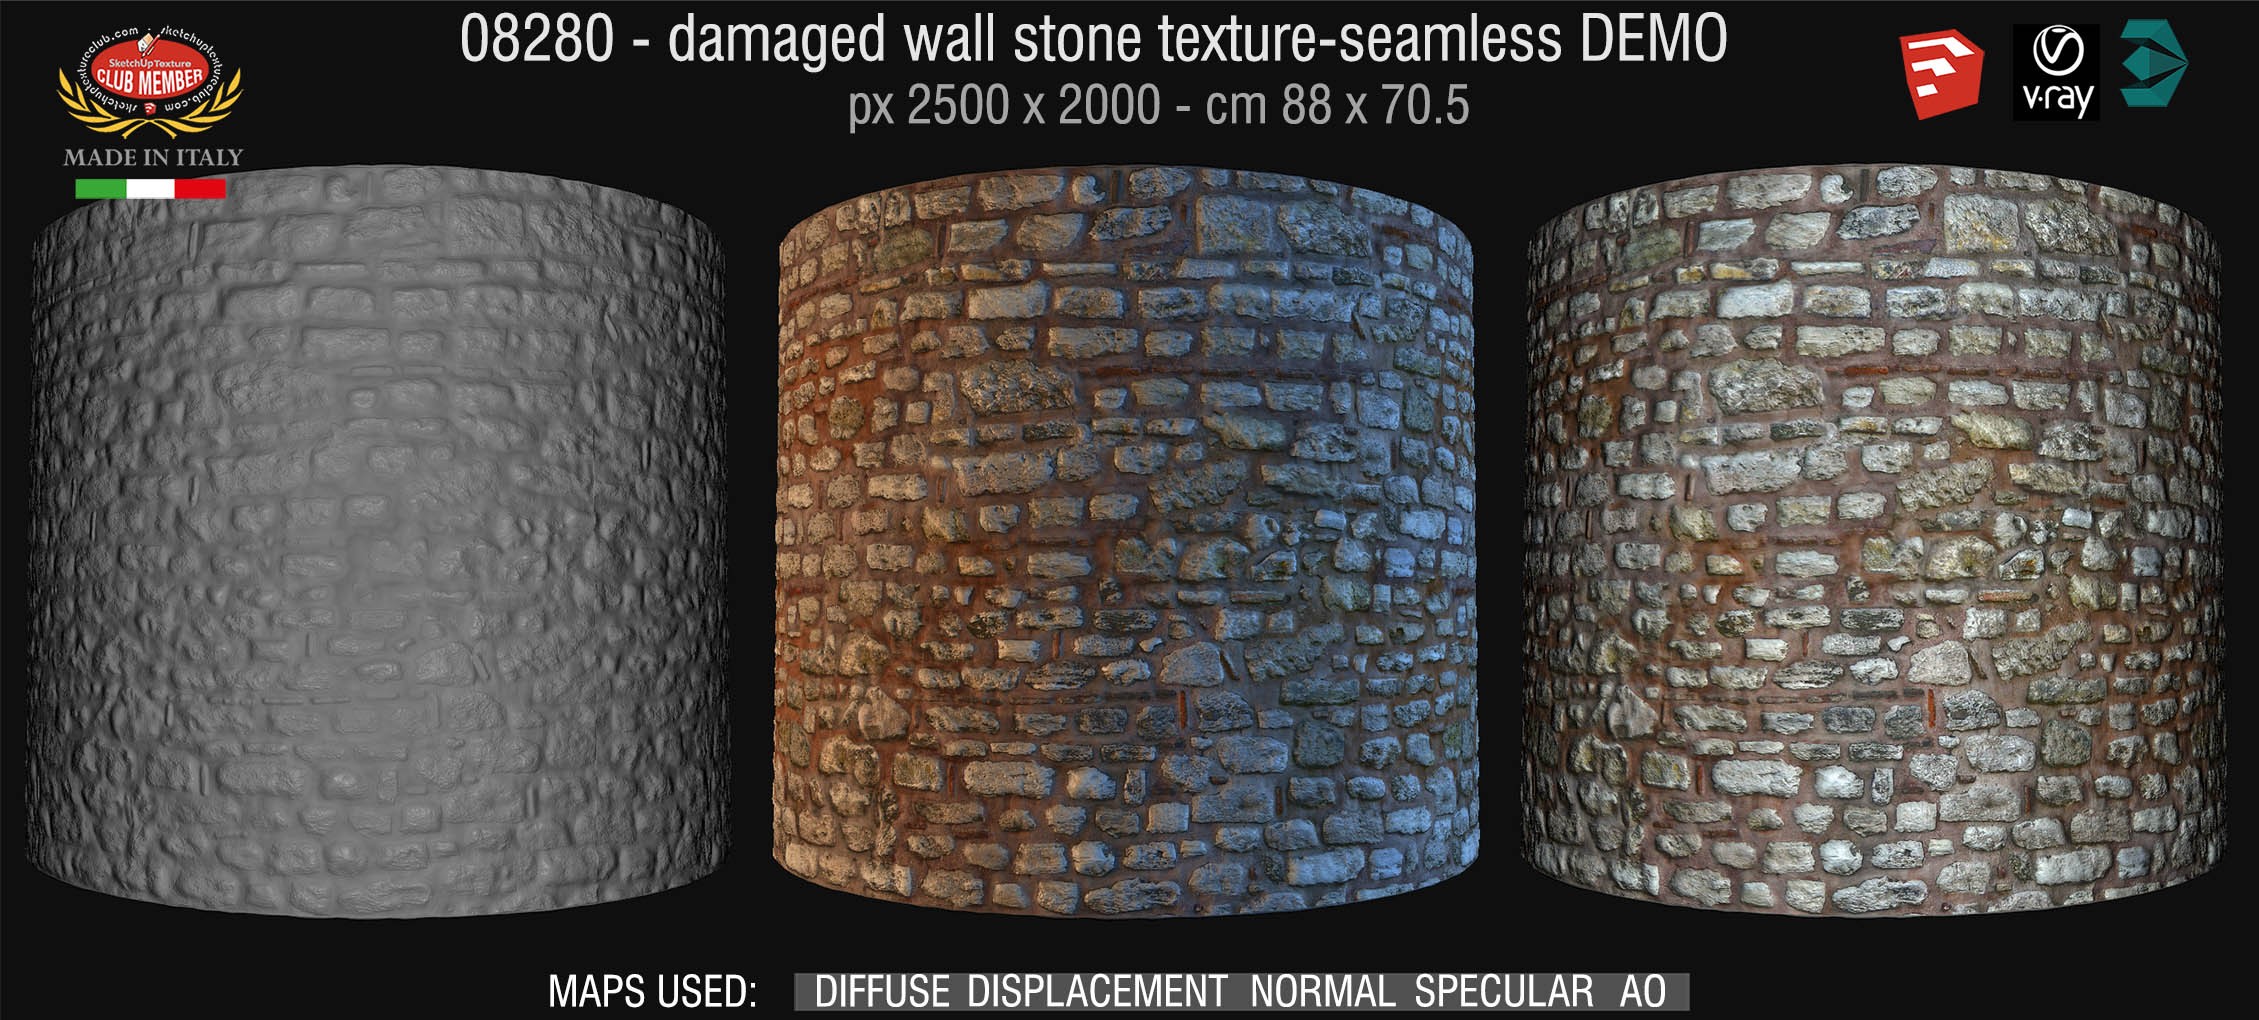 08280 HR Damaged wall stone texture + maps DEMO